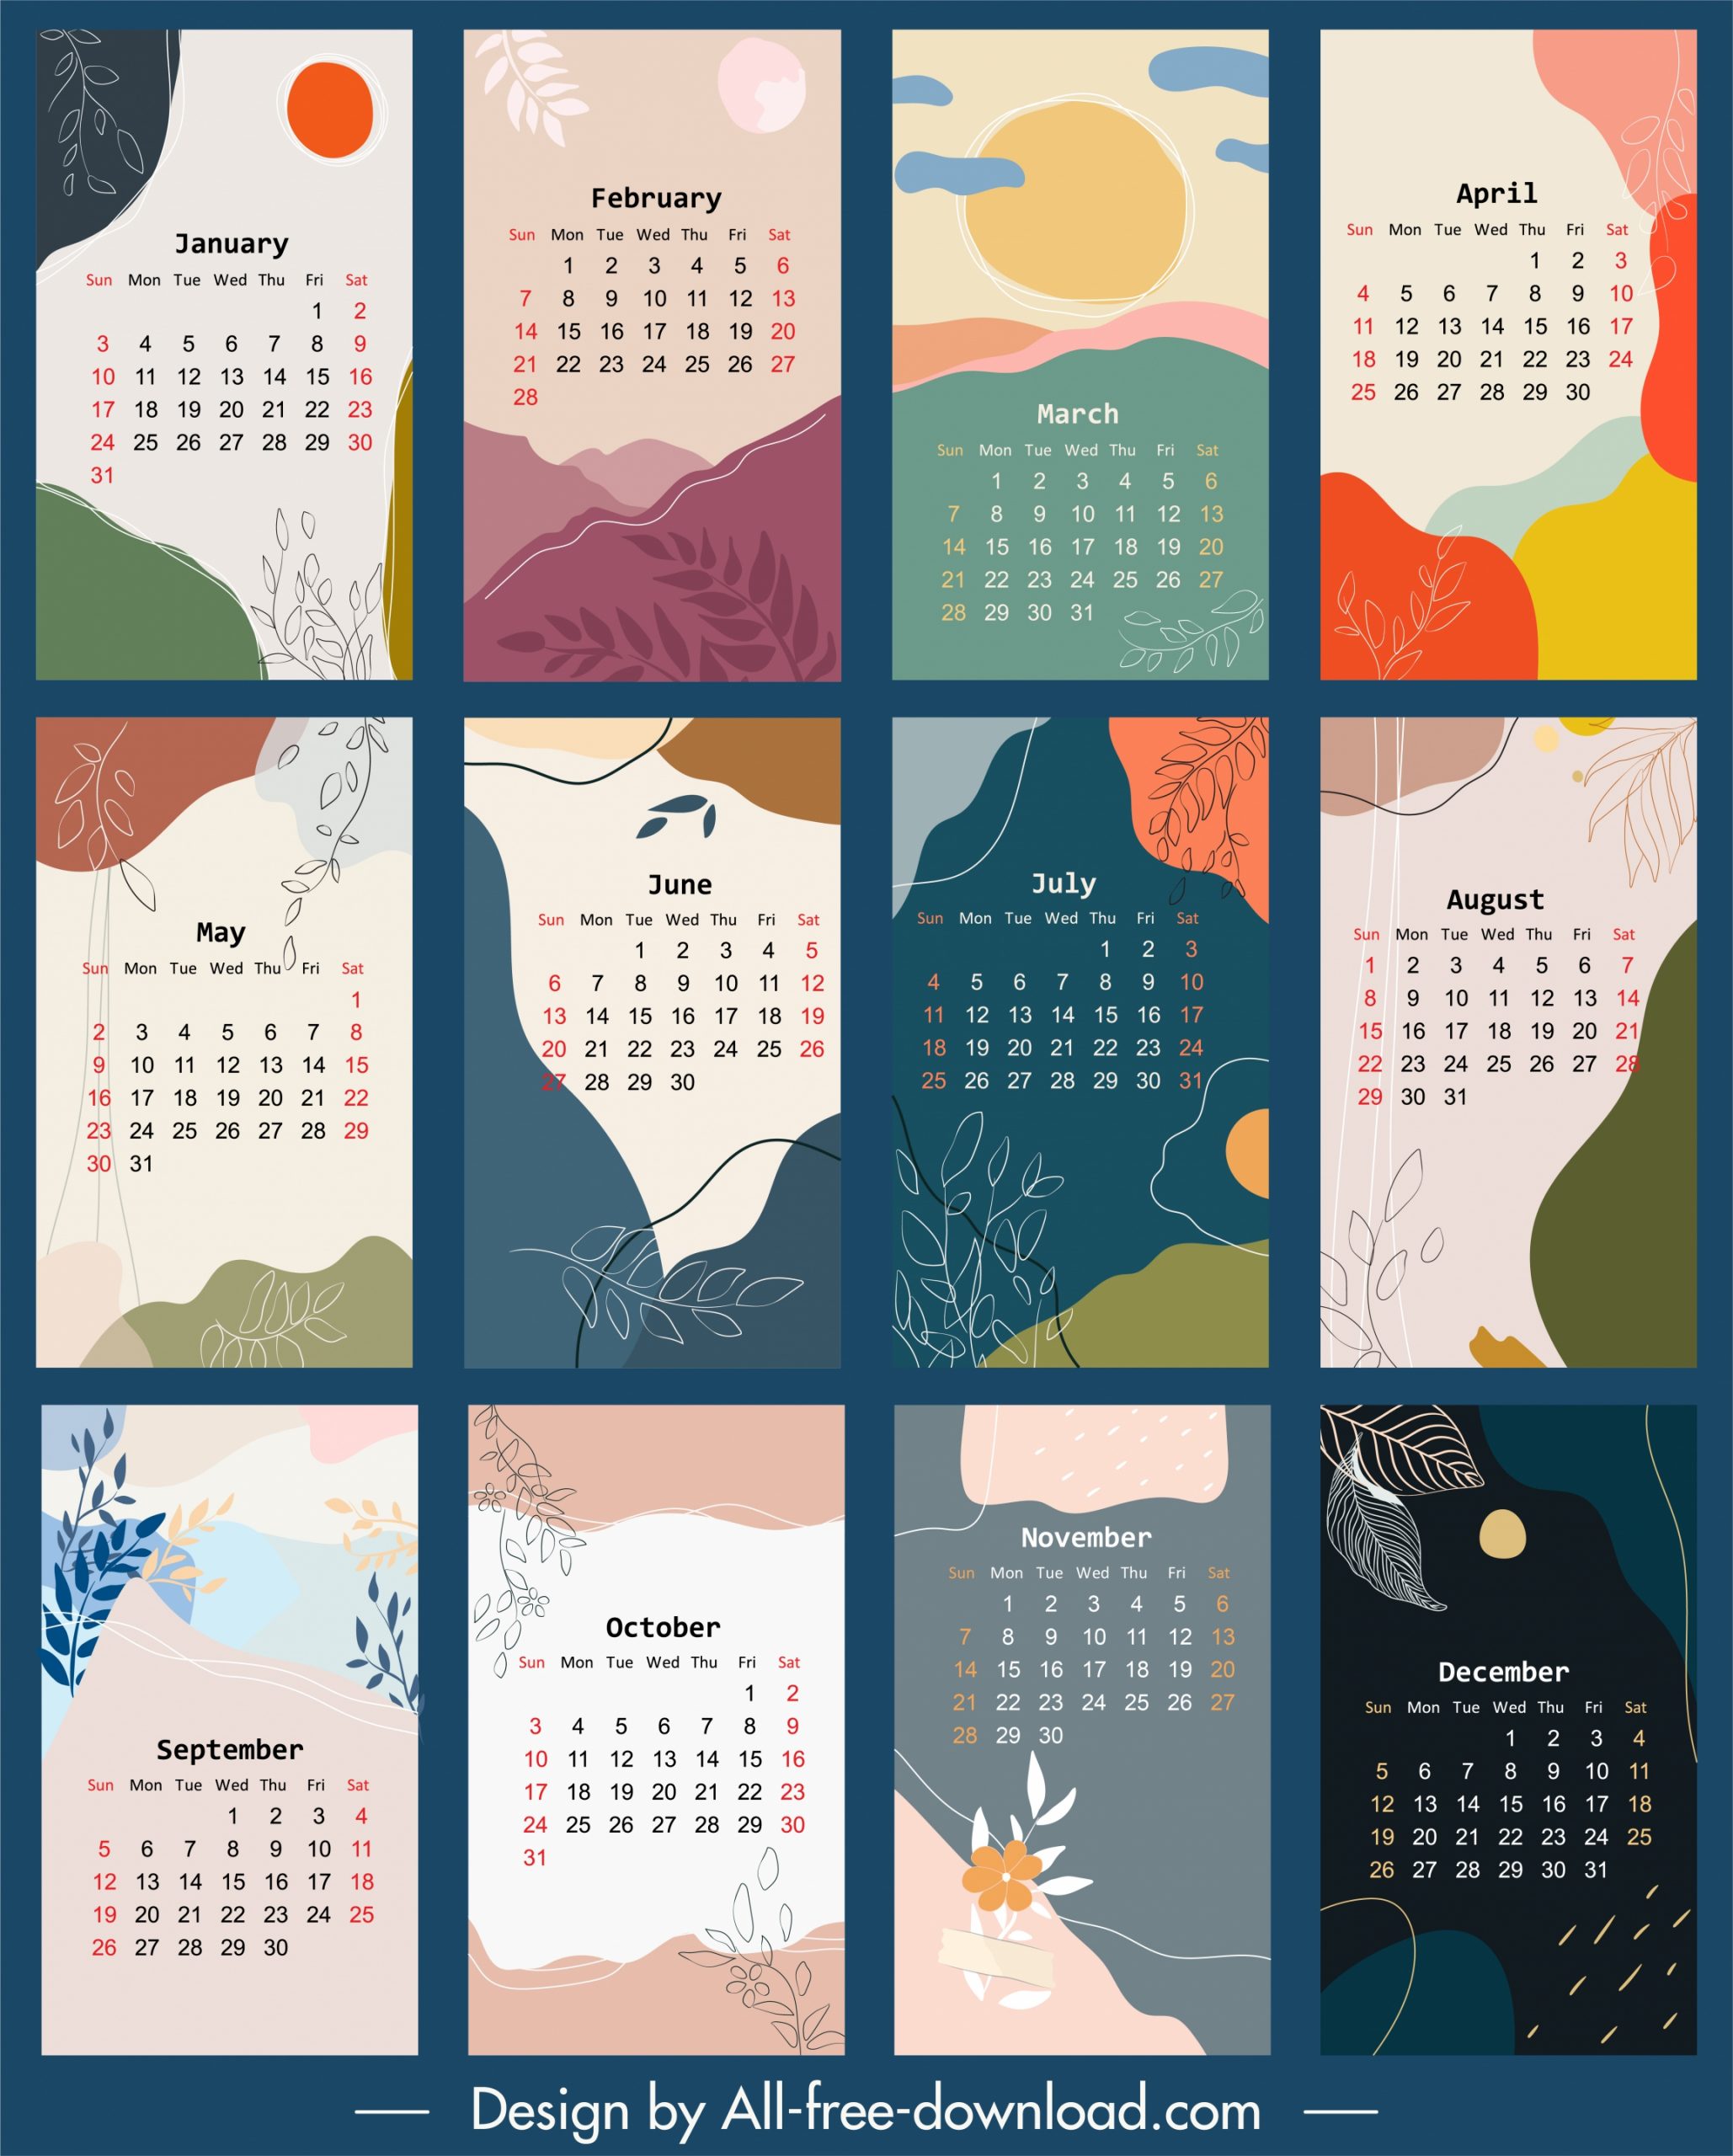 2021 Calendar with Holidays (Printable and Free Download